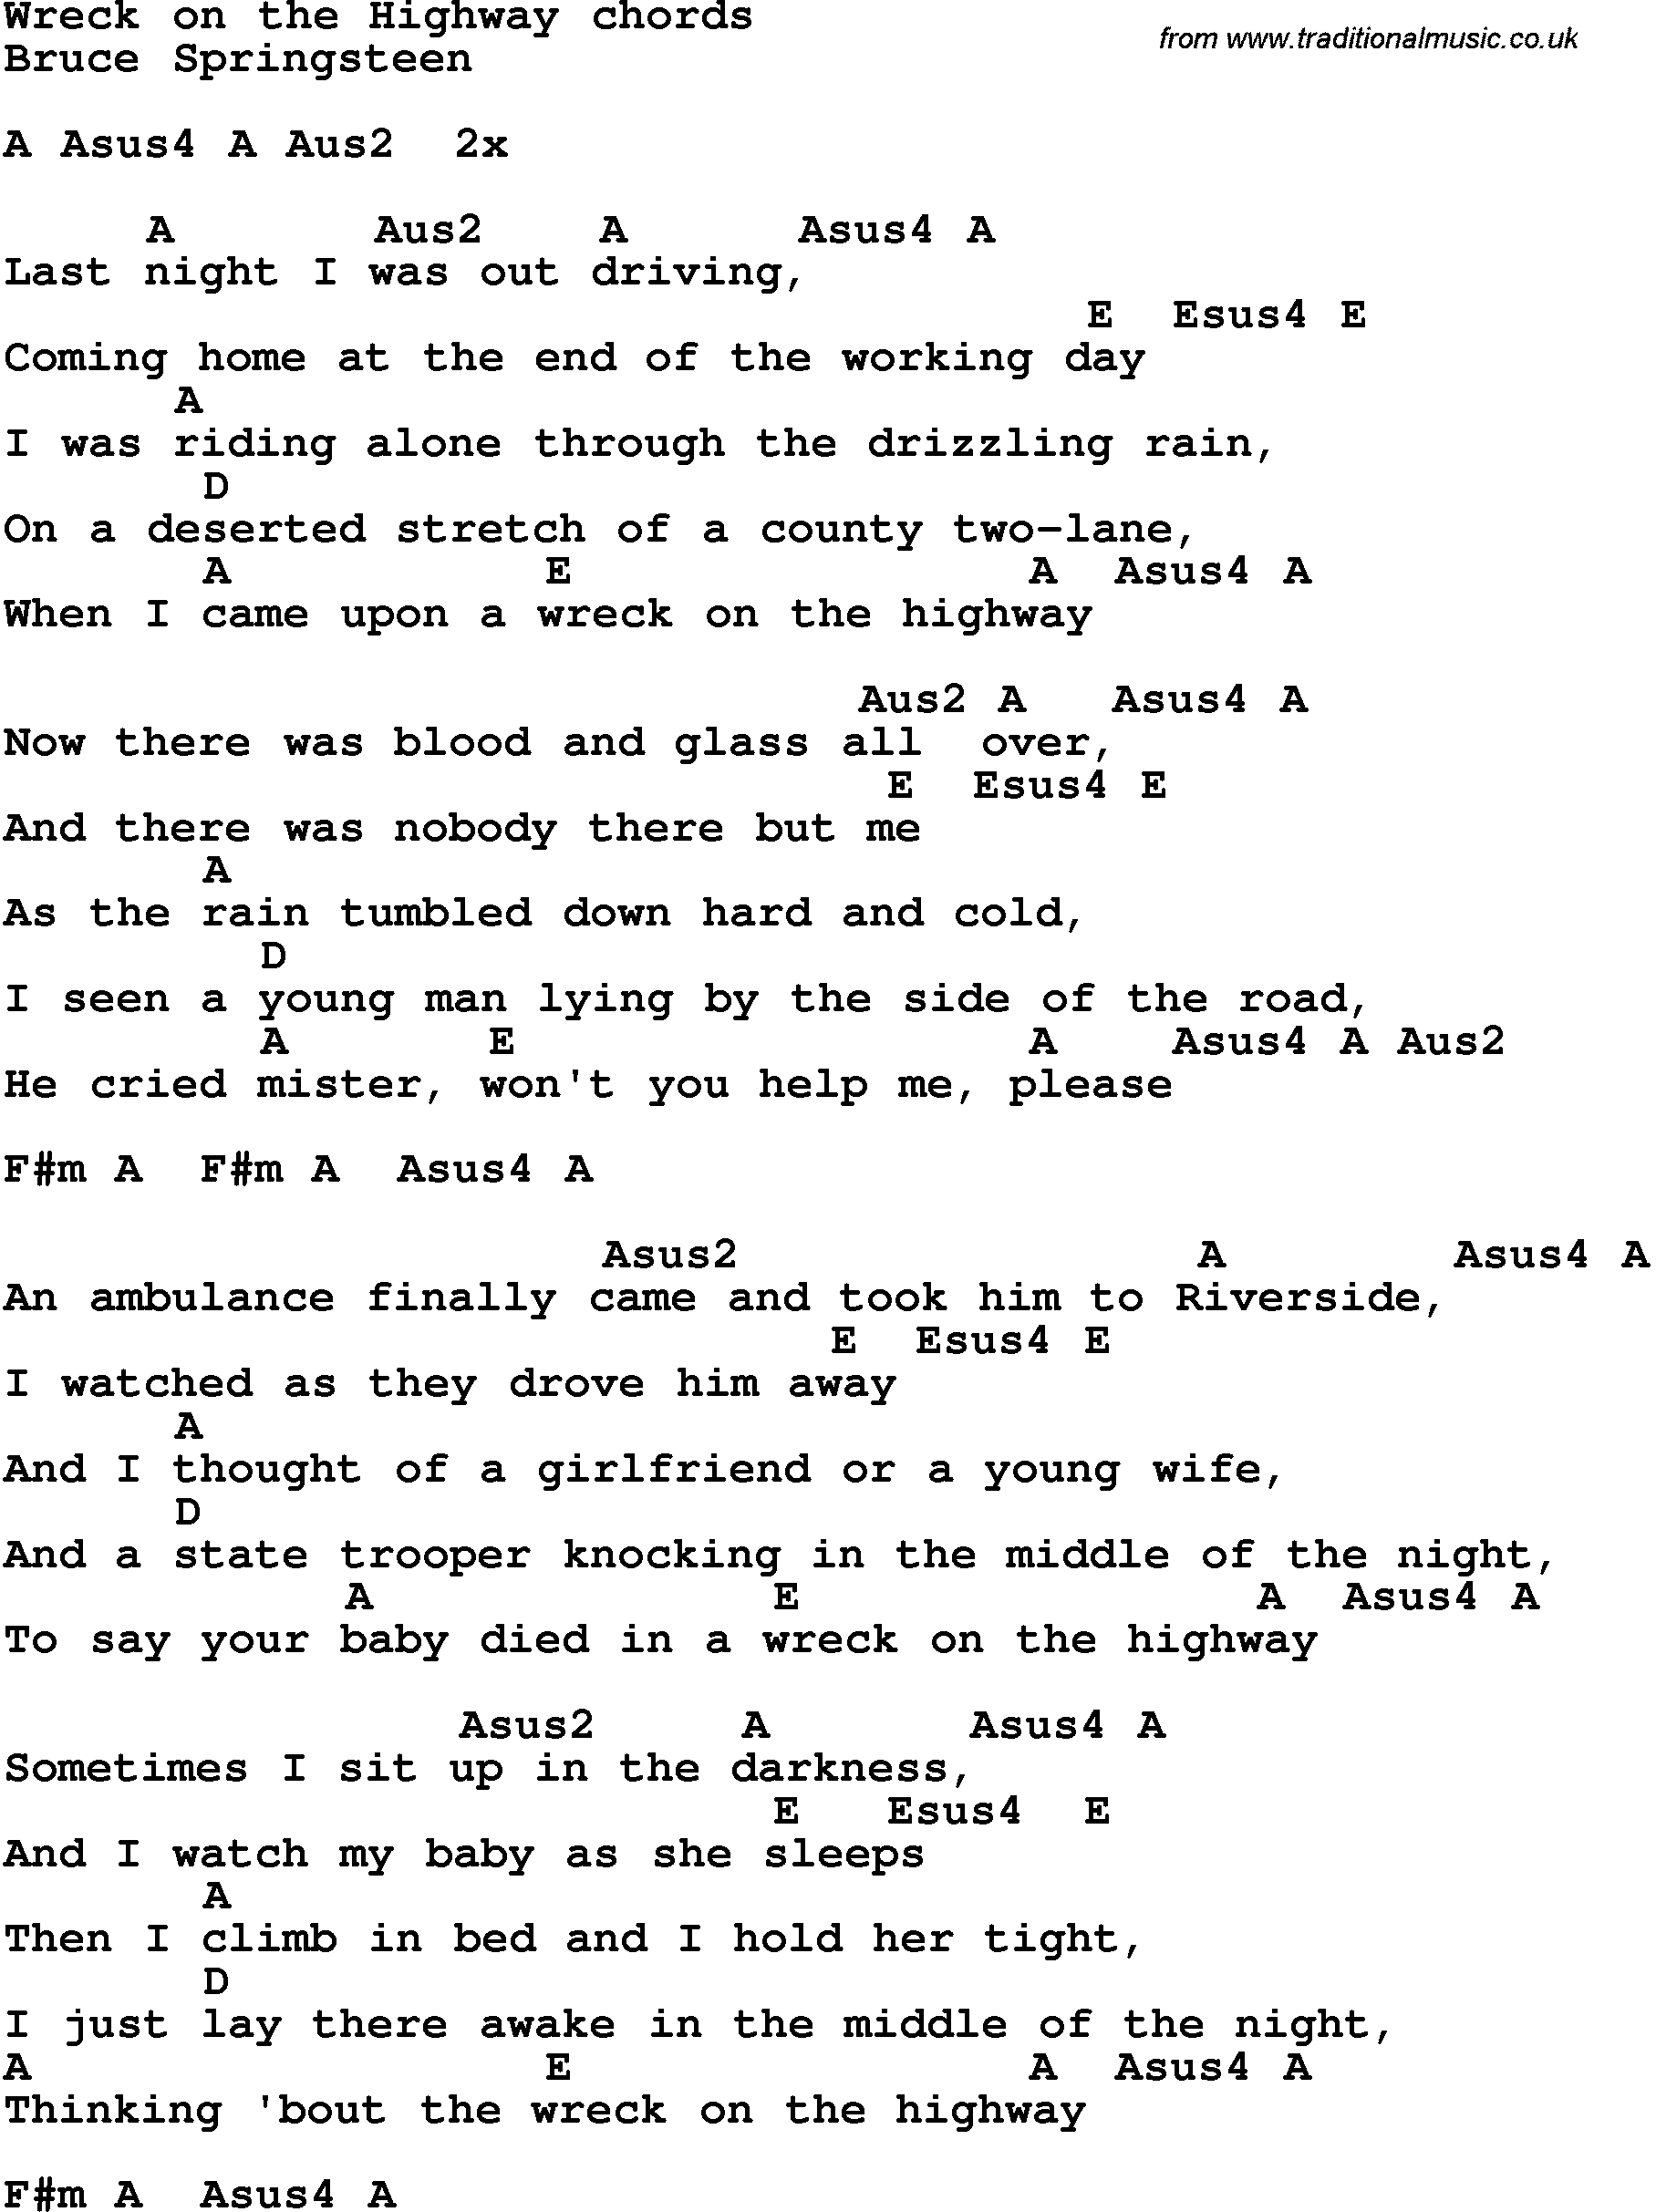 Song Lyrics with guitar chords for Wreckonthe Highway